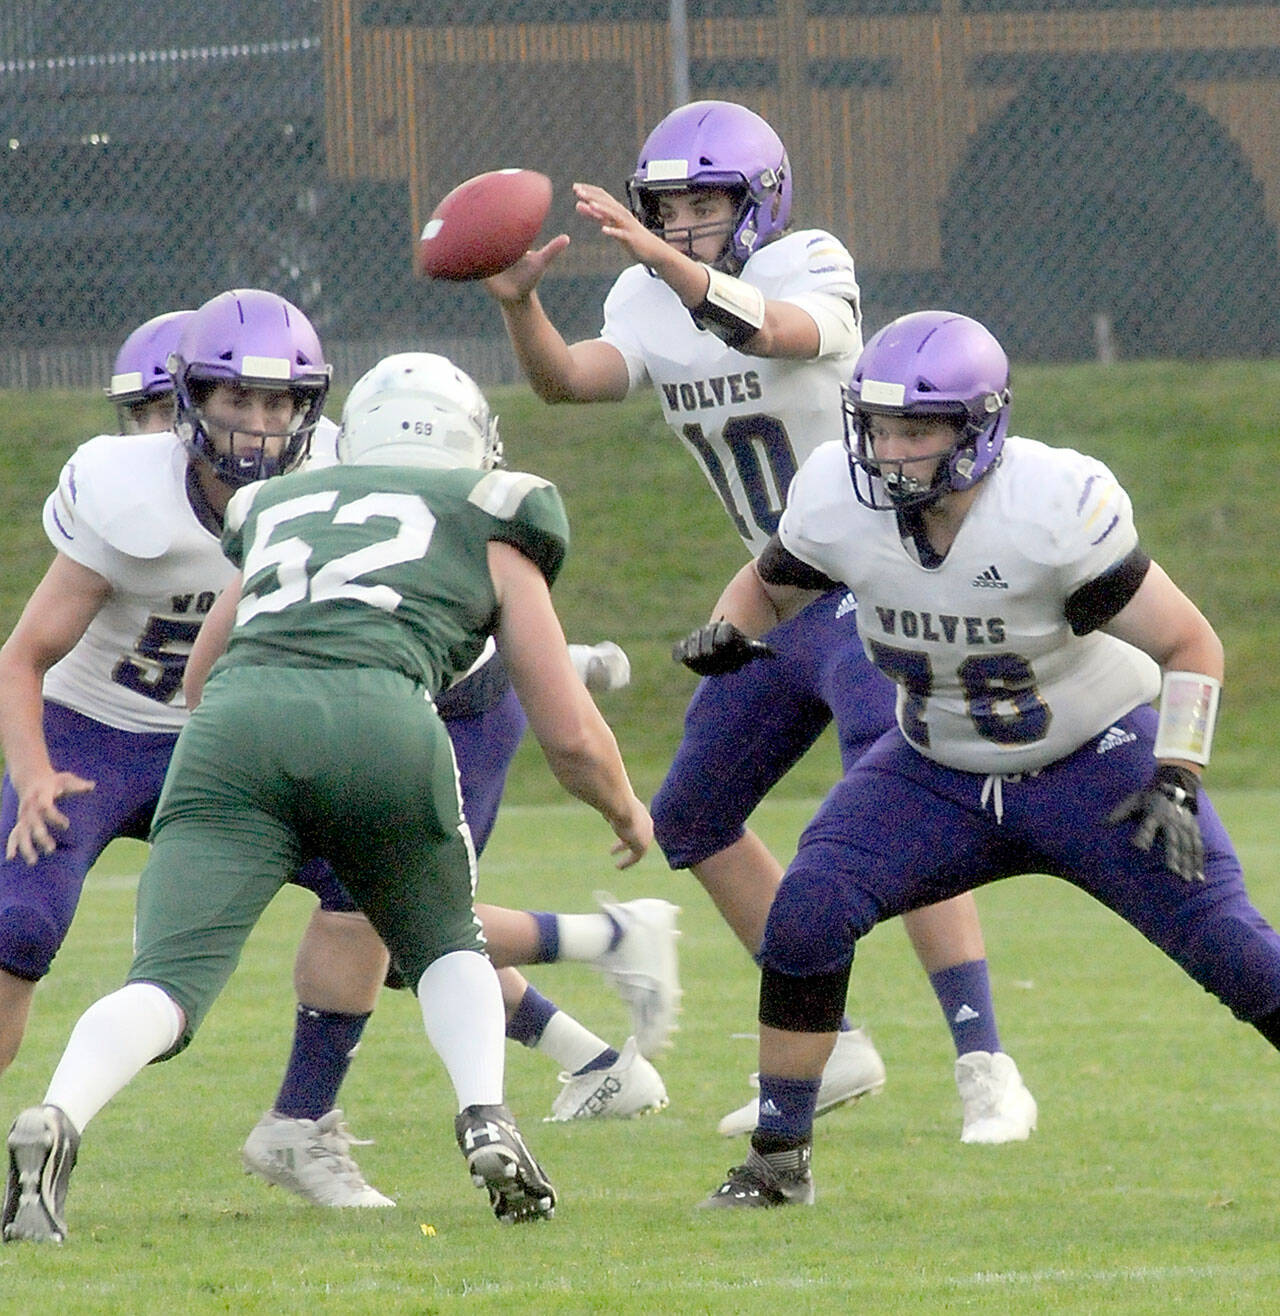 KEITH THORPE/PENINSULA DAILY NEWS
Sequim quarterback Lars Weiker receives the snap as linemen Ayden Holland, left, and Nehemiah Guzman defend against Port Angeles' Thomas Arand on Friday.